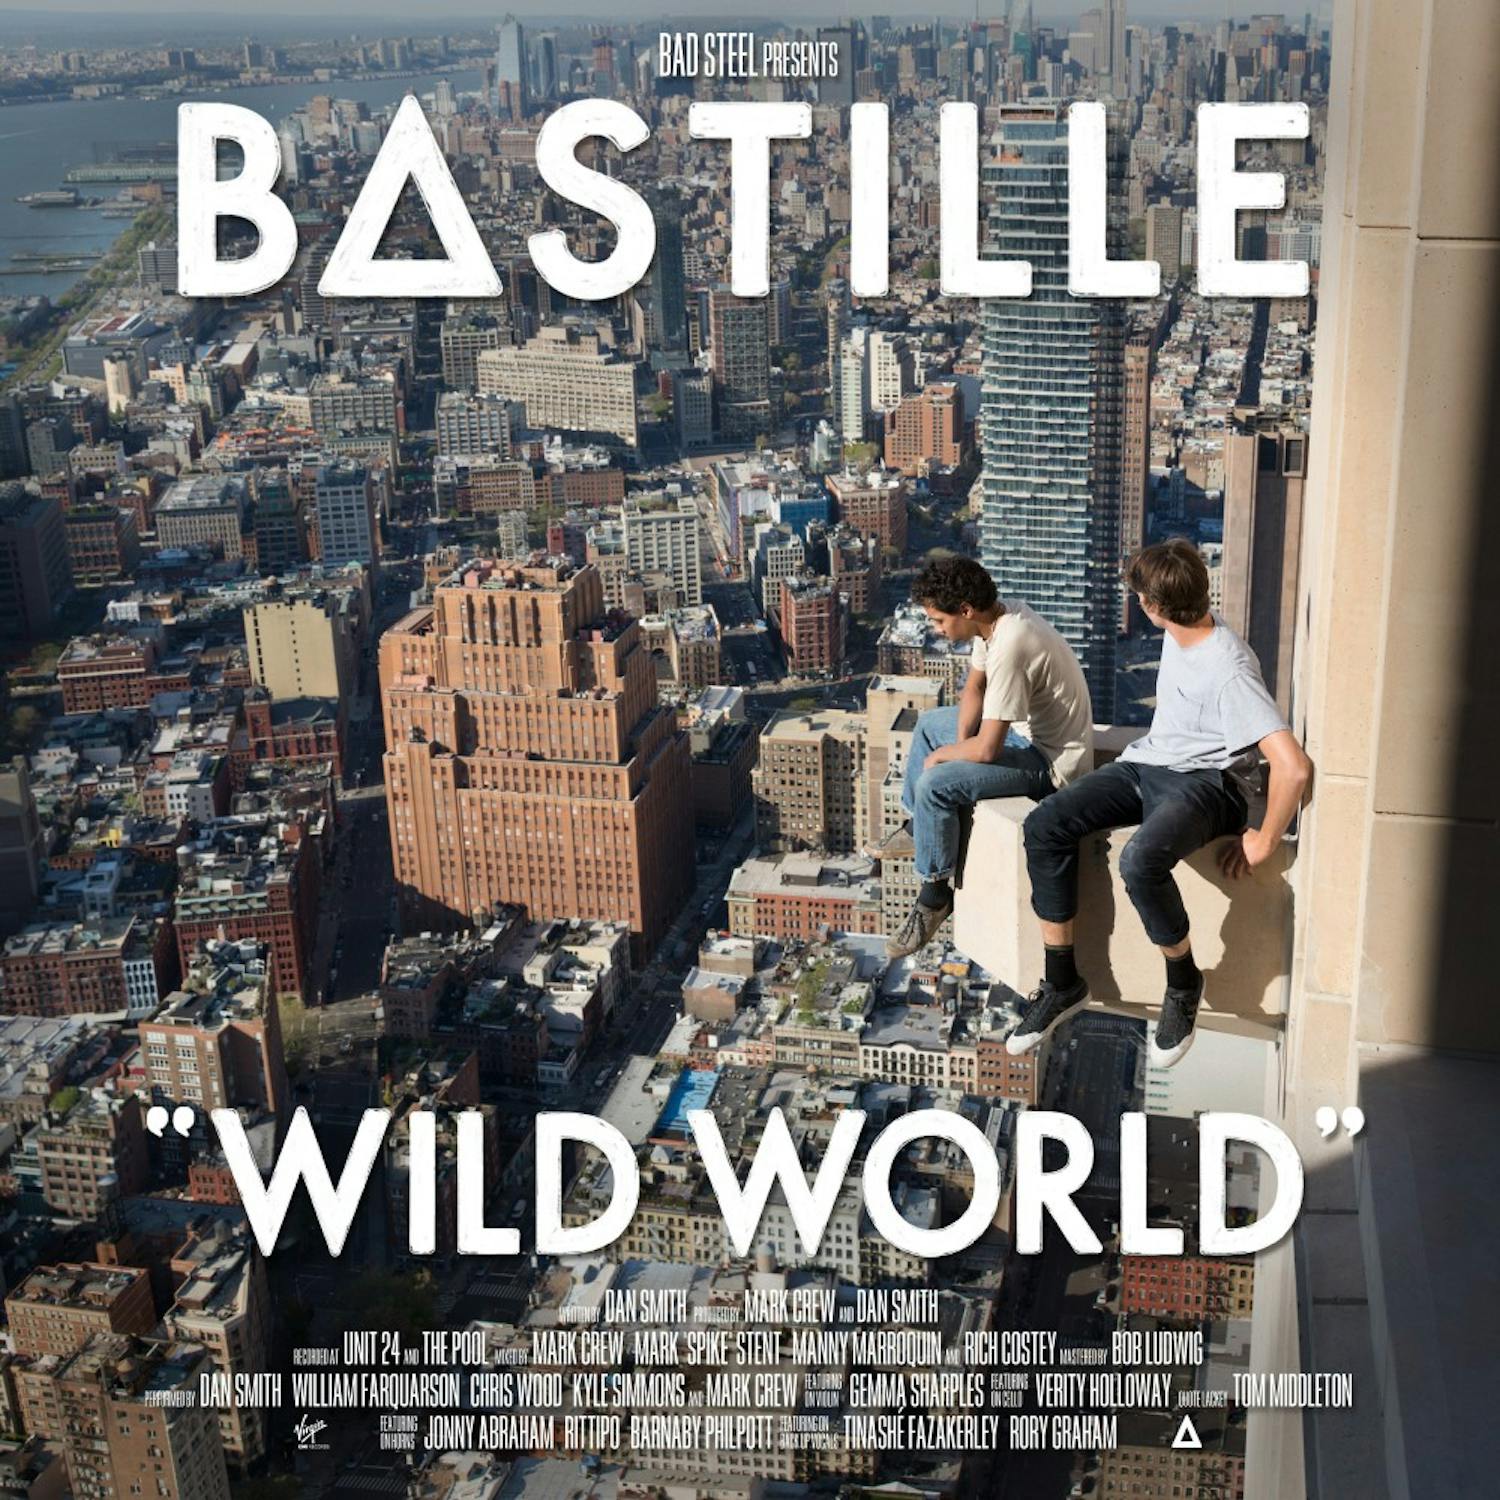 Bastille's sophomore album "Wild World" focuses on important social issues with catchy, upbeat tunes&nbsp;